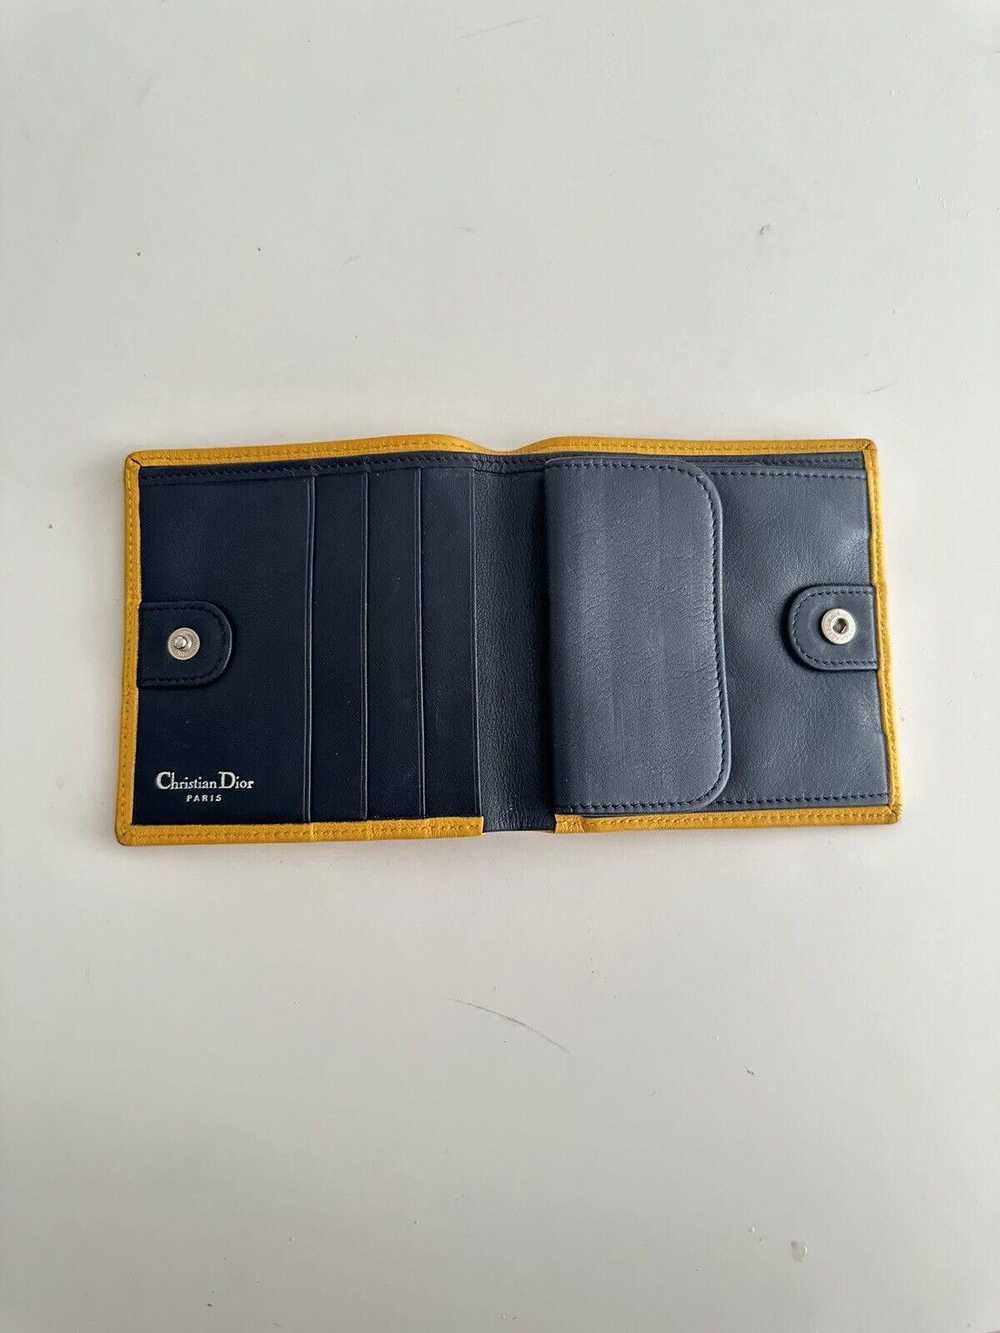 Dior christian dior yellow leather wallet - image 2